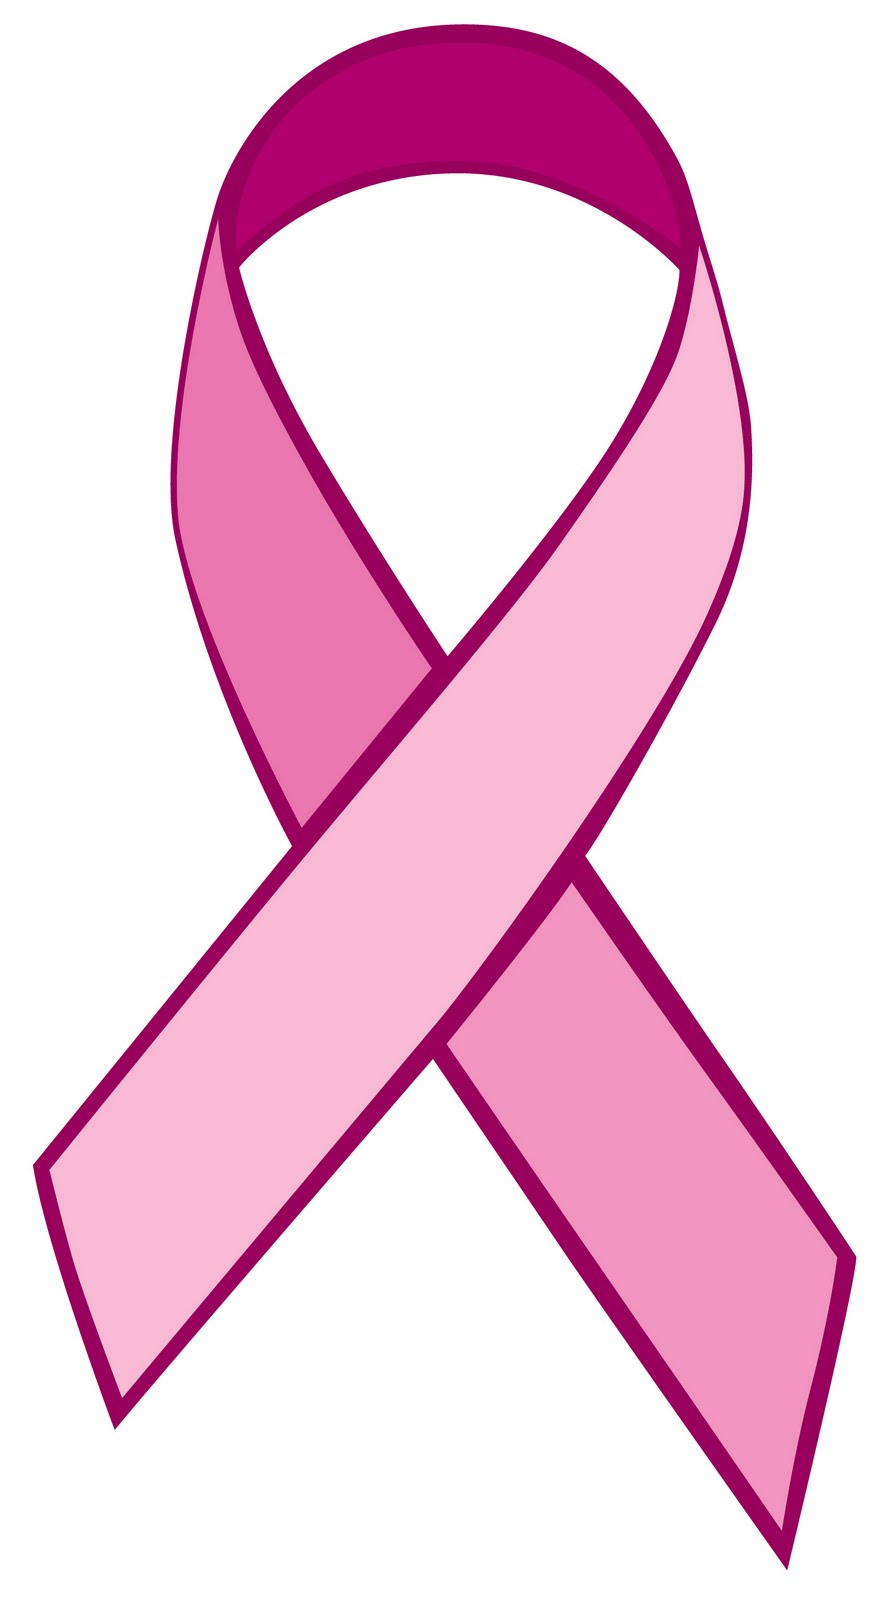 Breast Cancer Ribbon Outline Cliparts.co